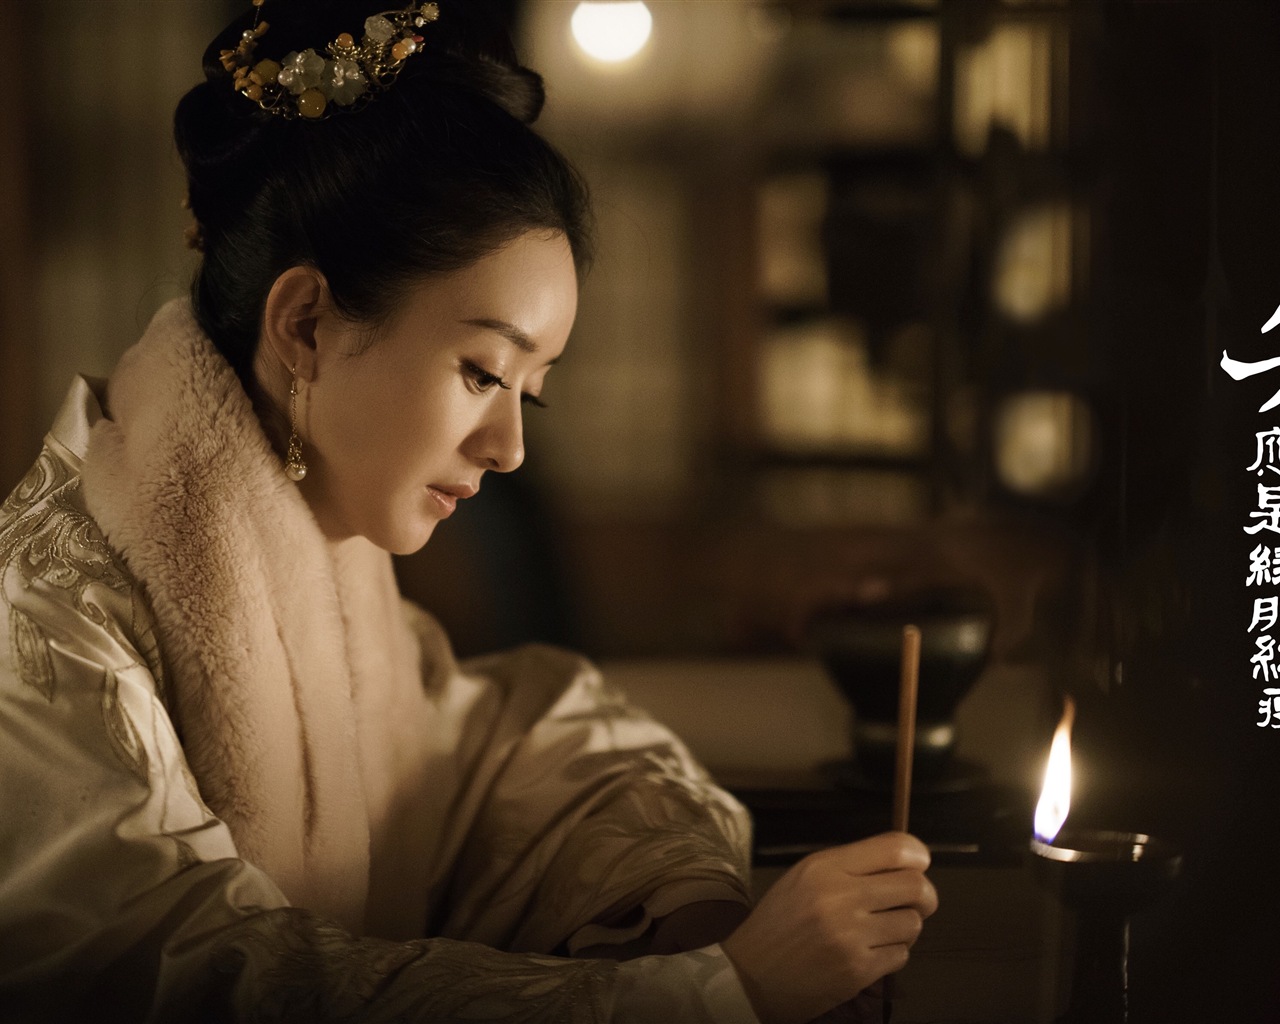 The Story Of MingLan, TV series HD wallpapers #26 - 1280x1024